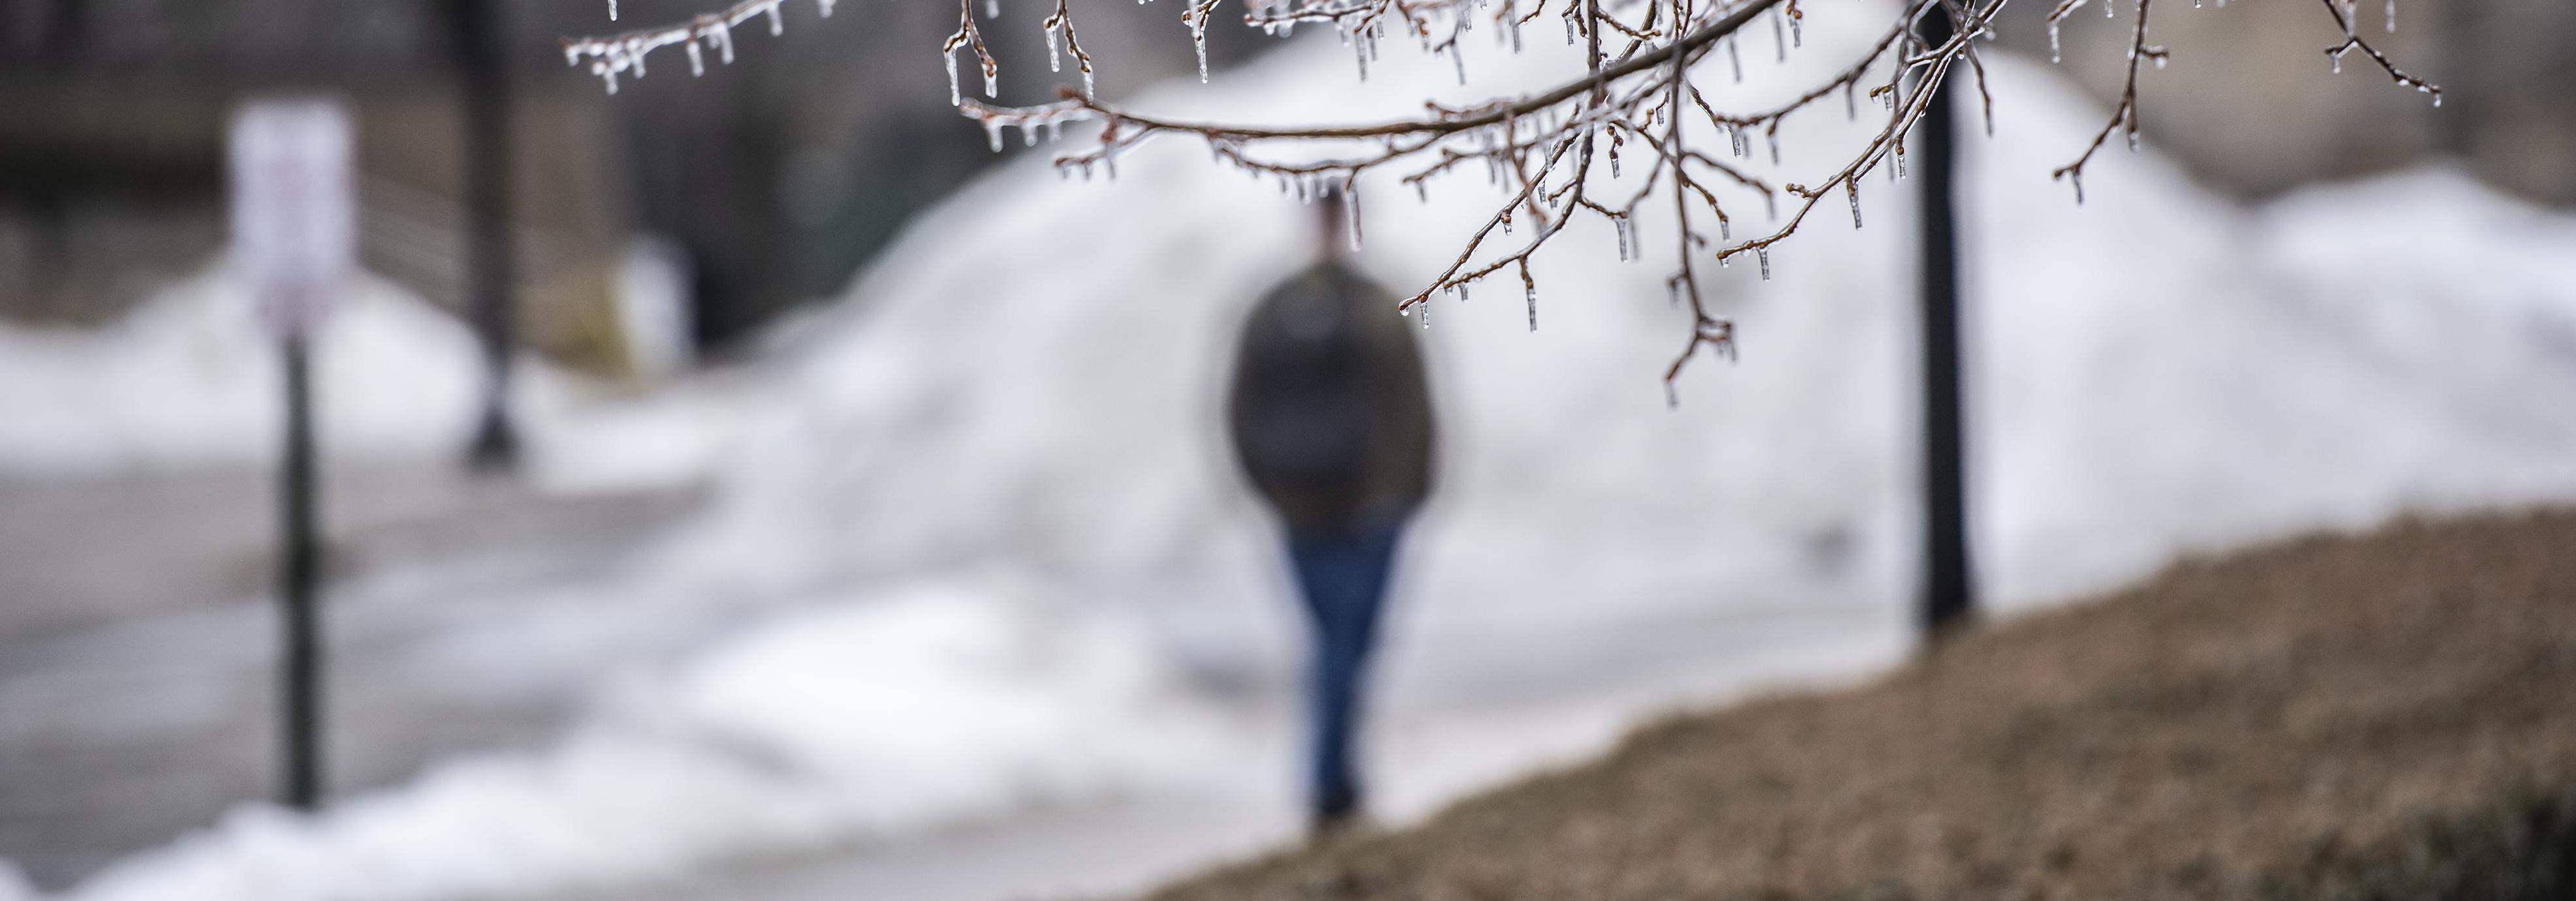 Person (out of focus) walking on campus with icy tree in foreground.